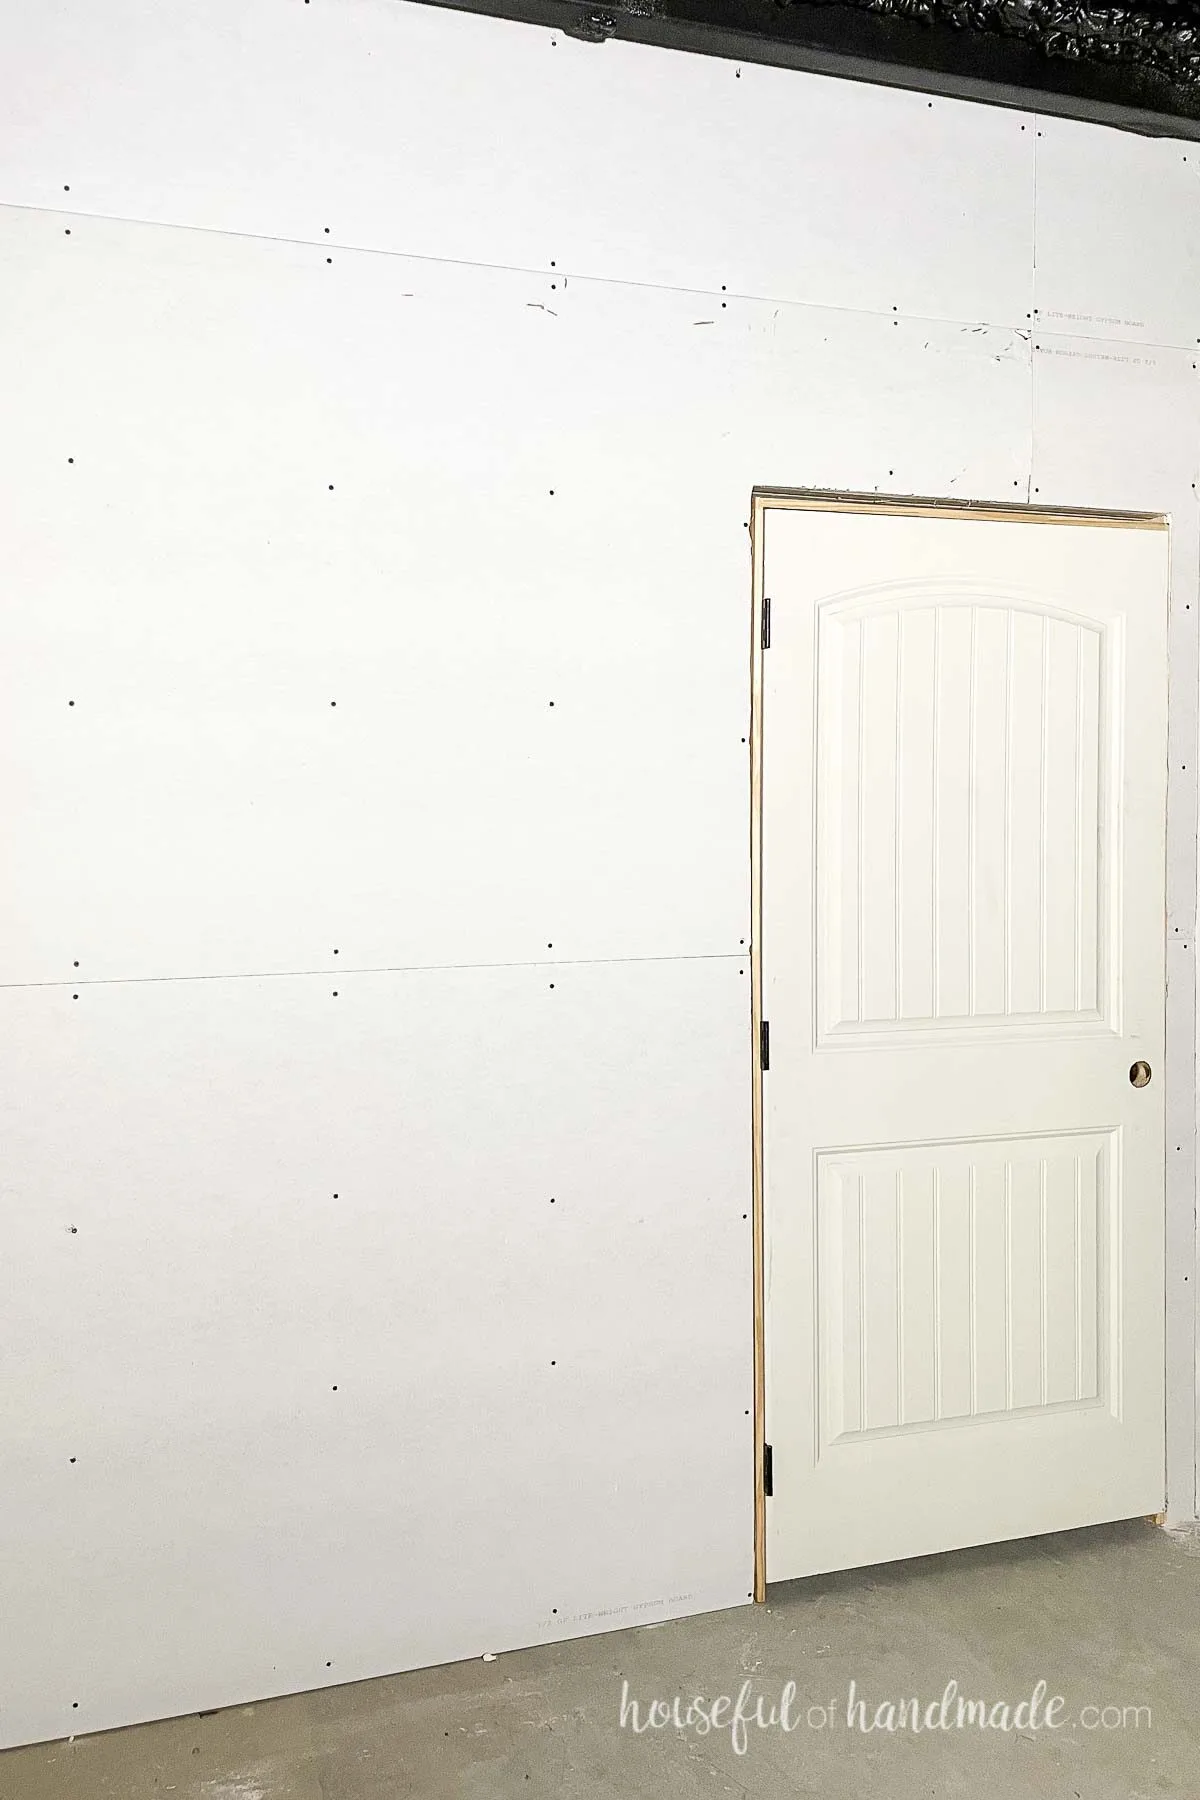 Wall covered in sheetrock around a door. 